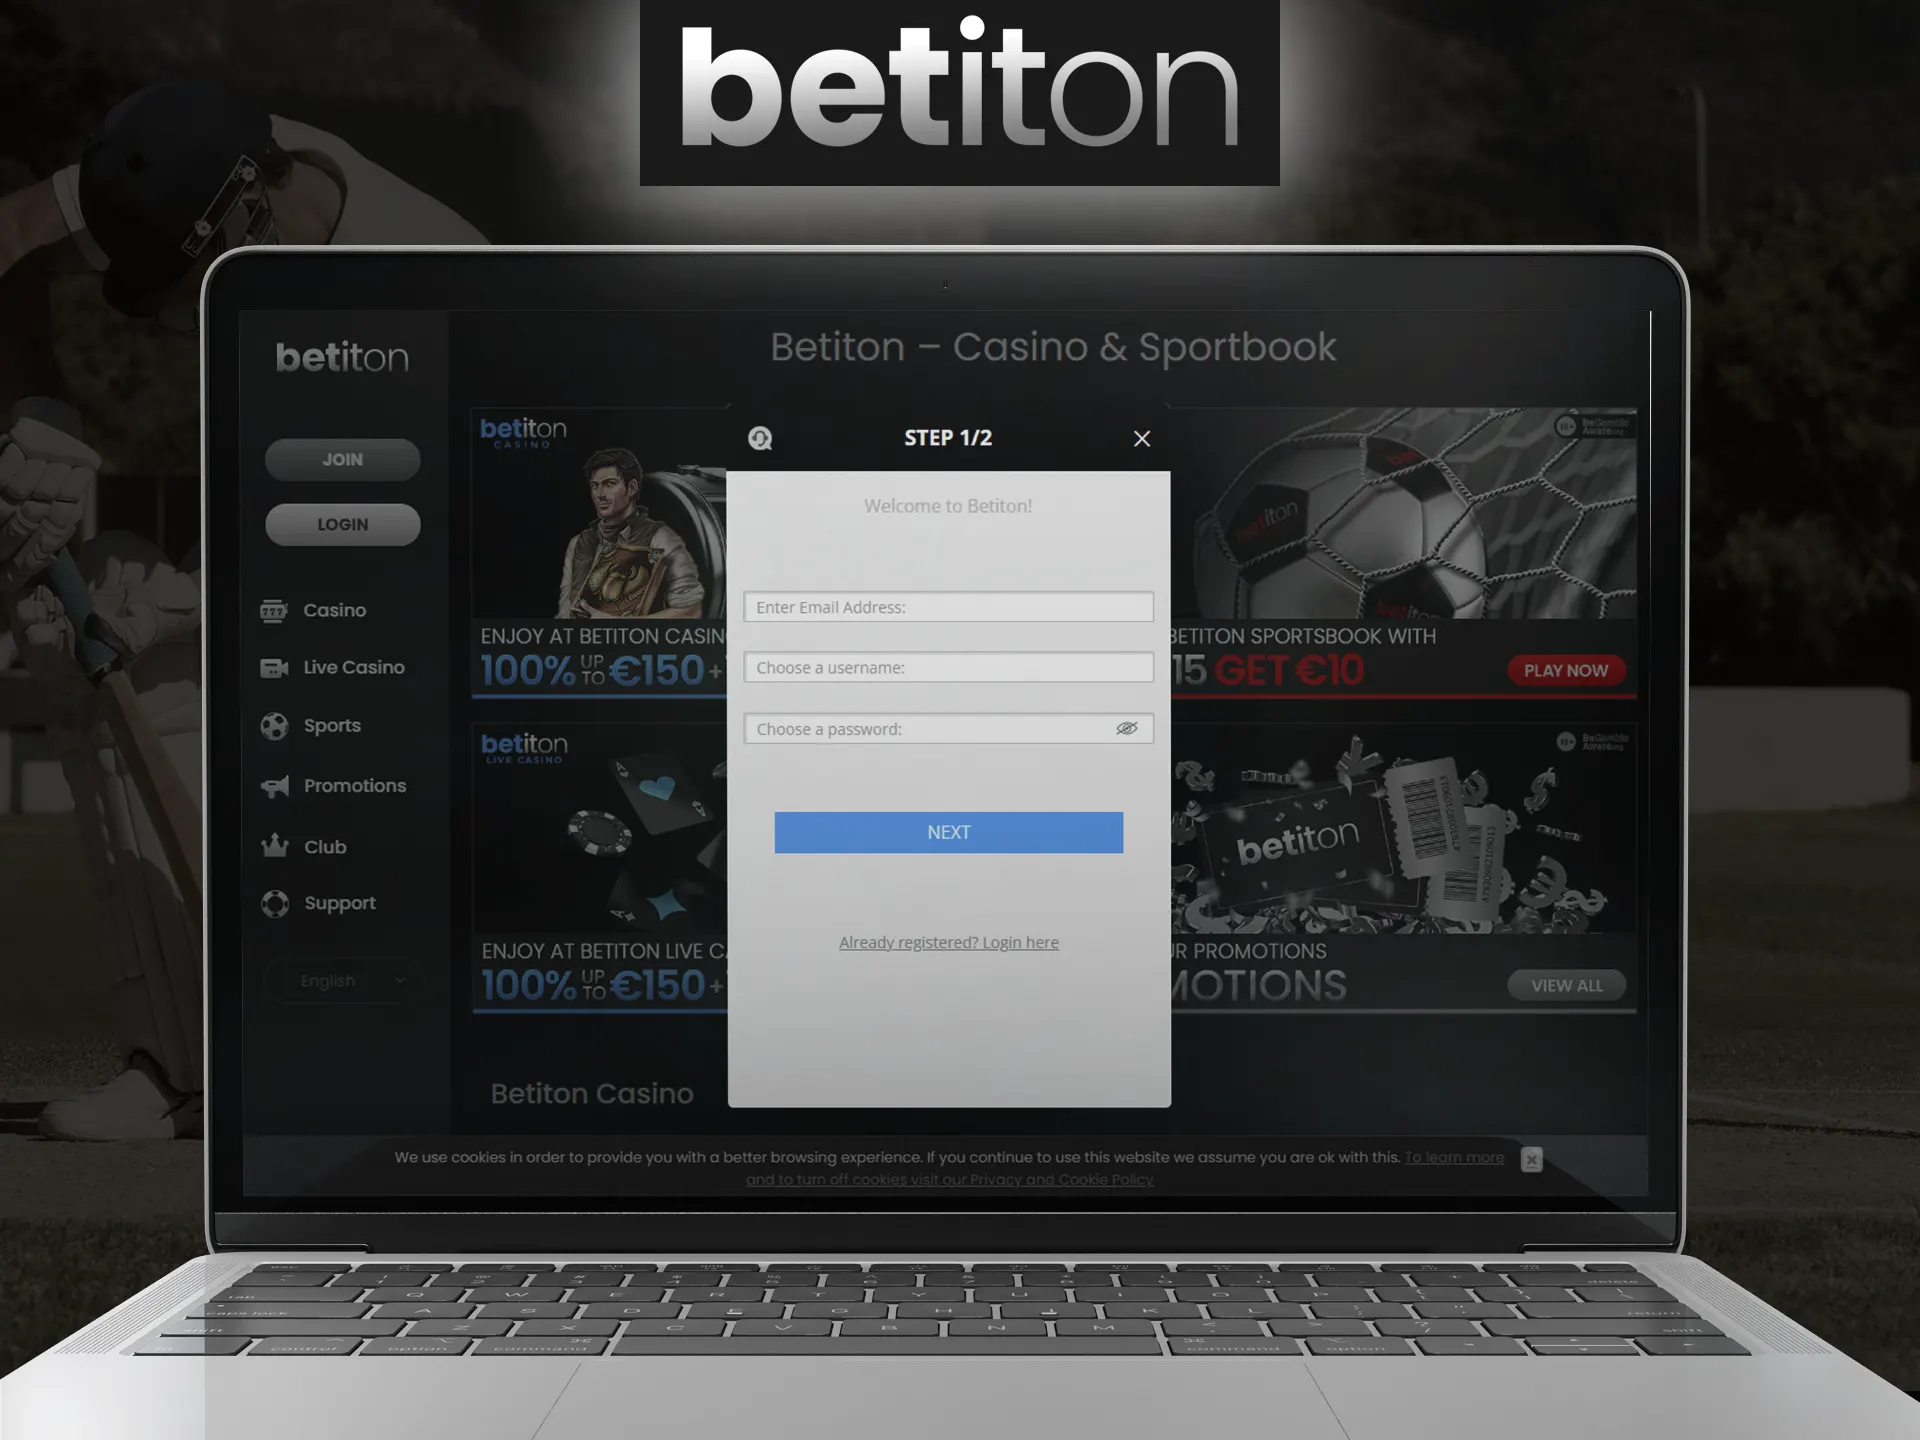 Make your own Betiton account.